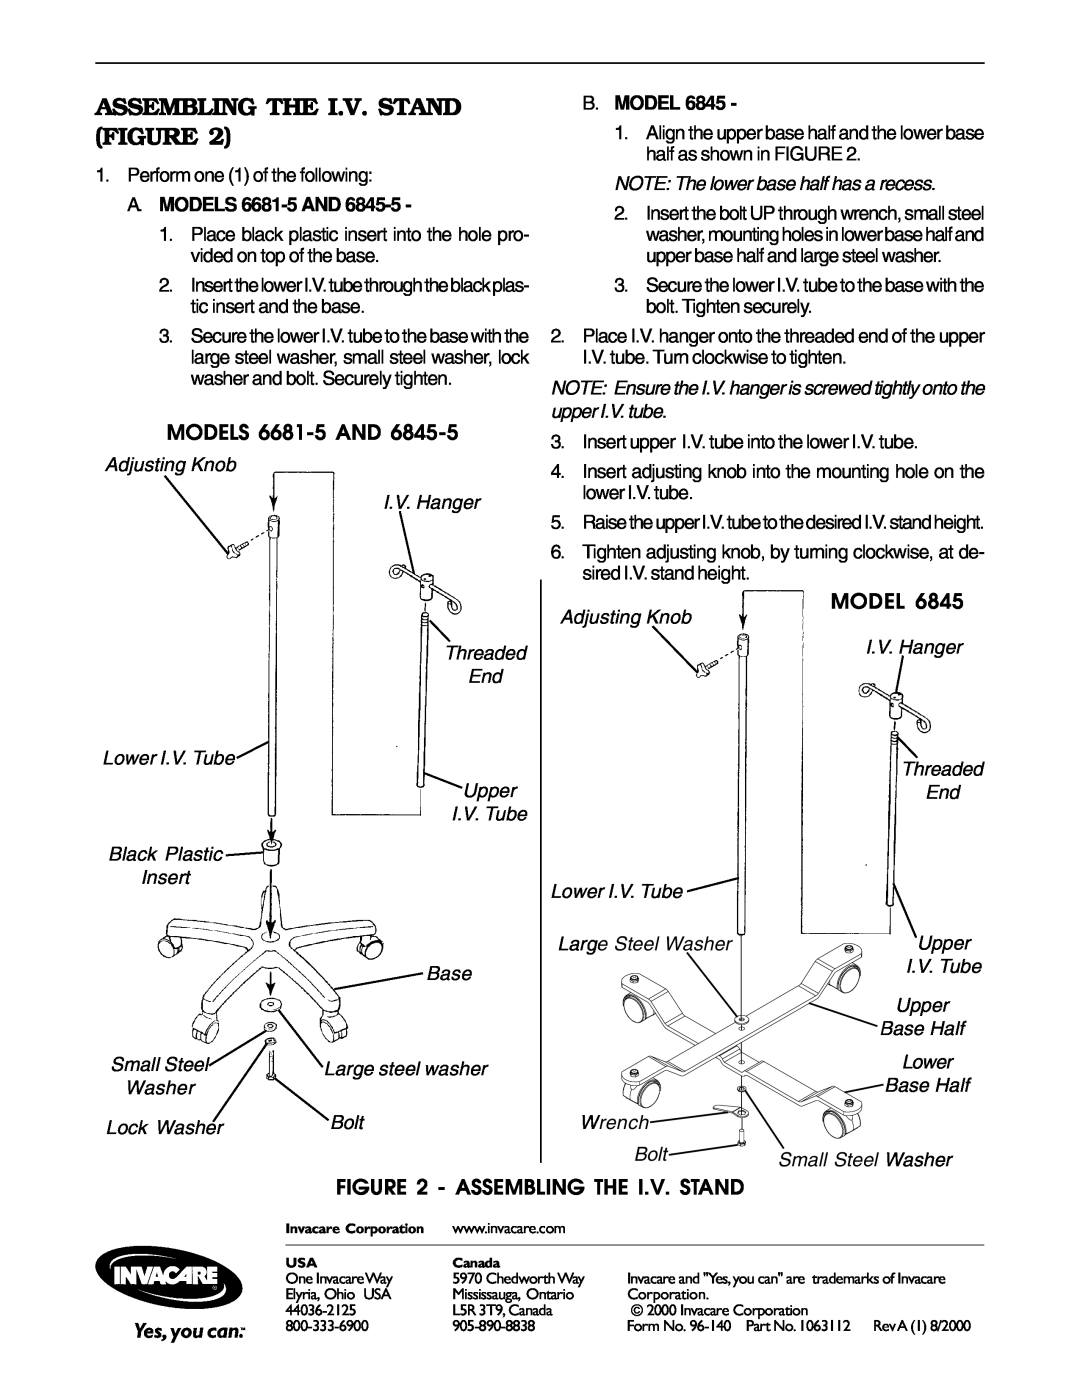 Invacare 6845-5 operating instructions Assembling The I.V. Stand Figure, A. MODELS 6681-5 AND, B. Model 